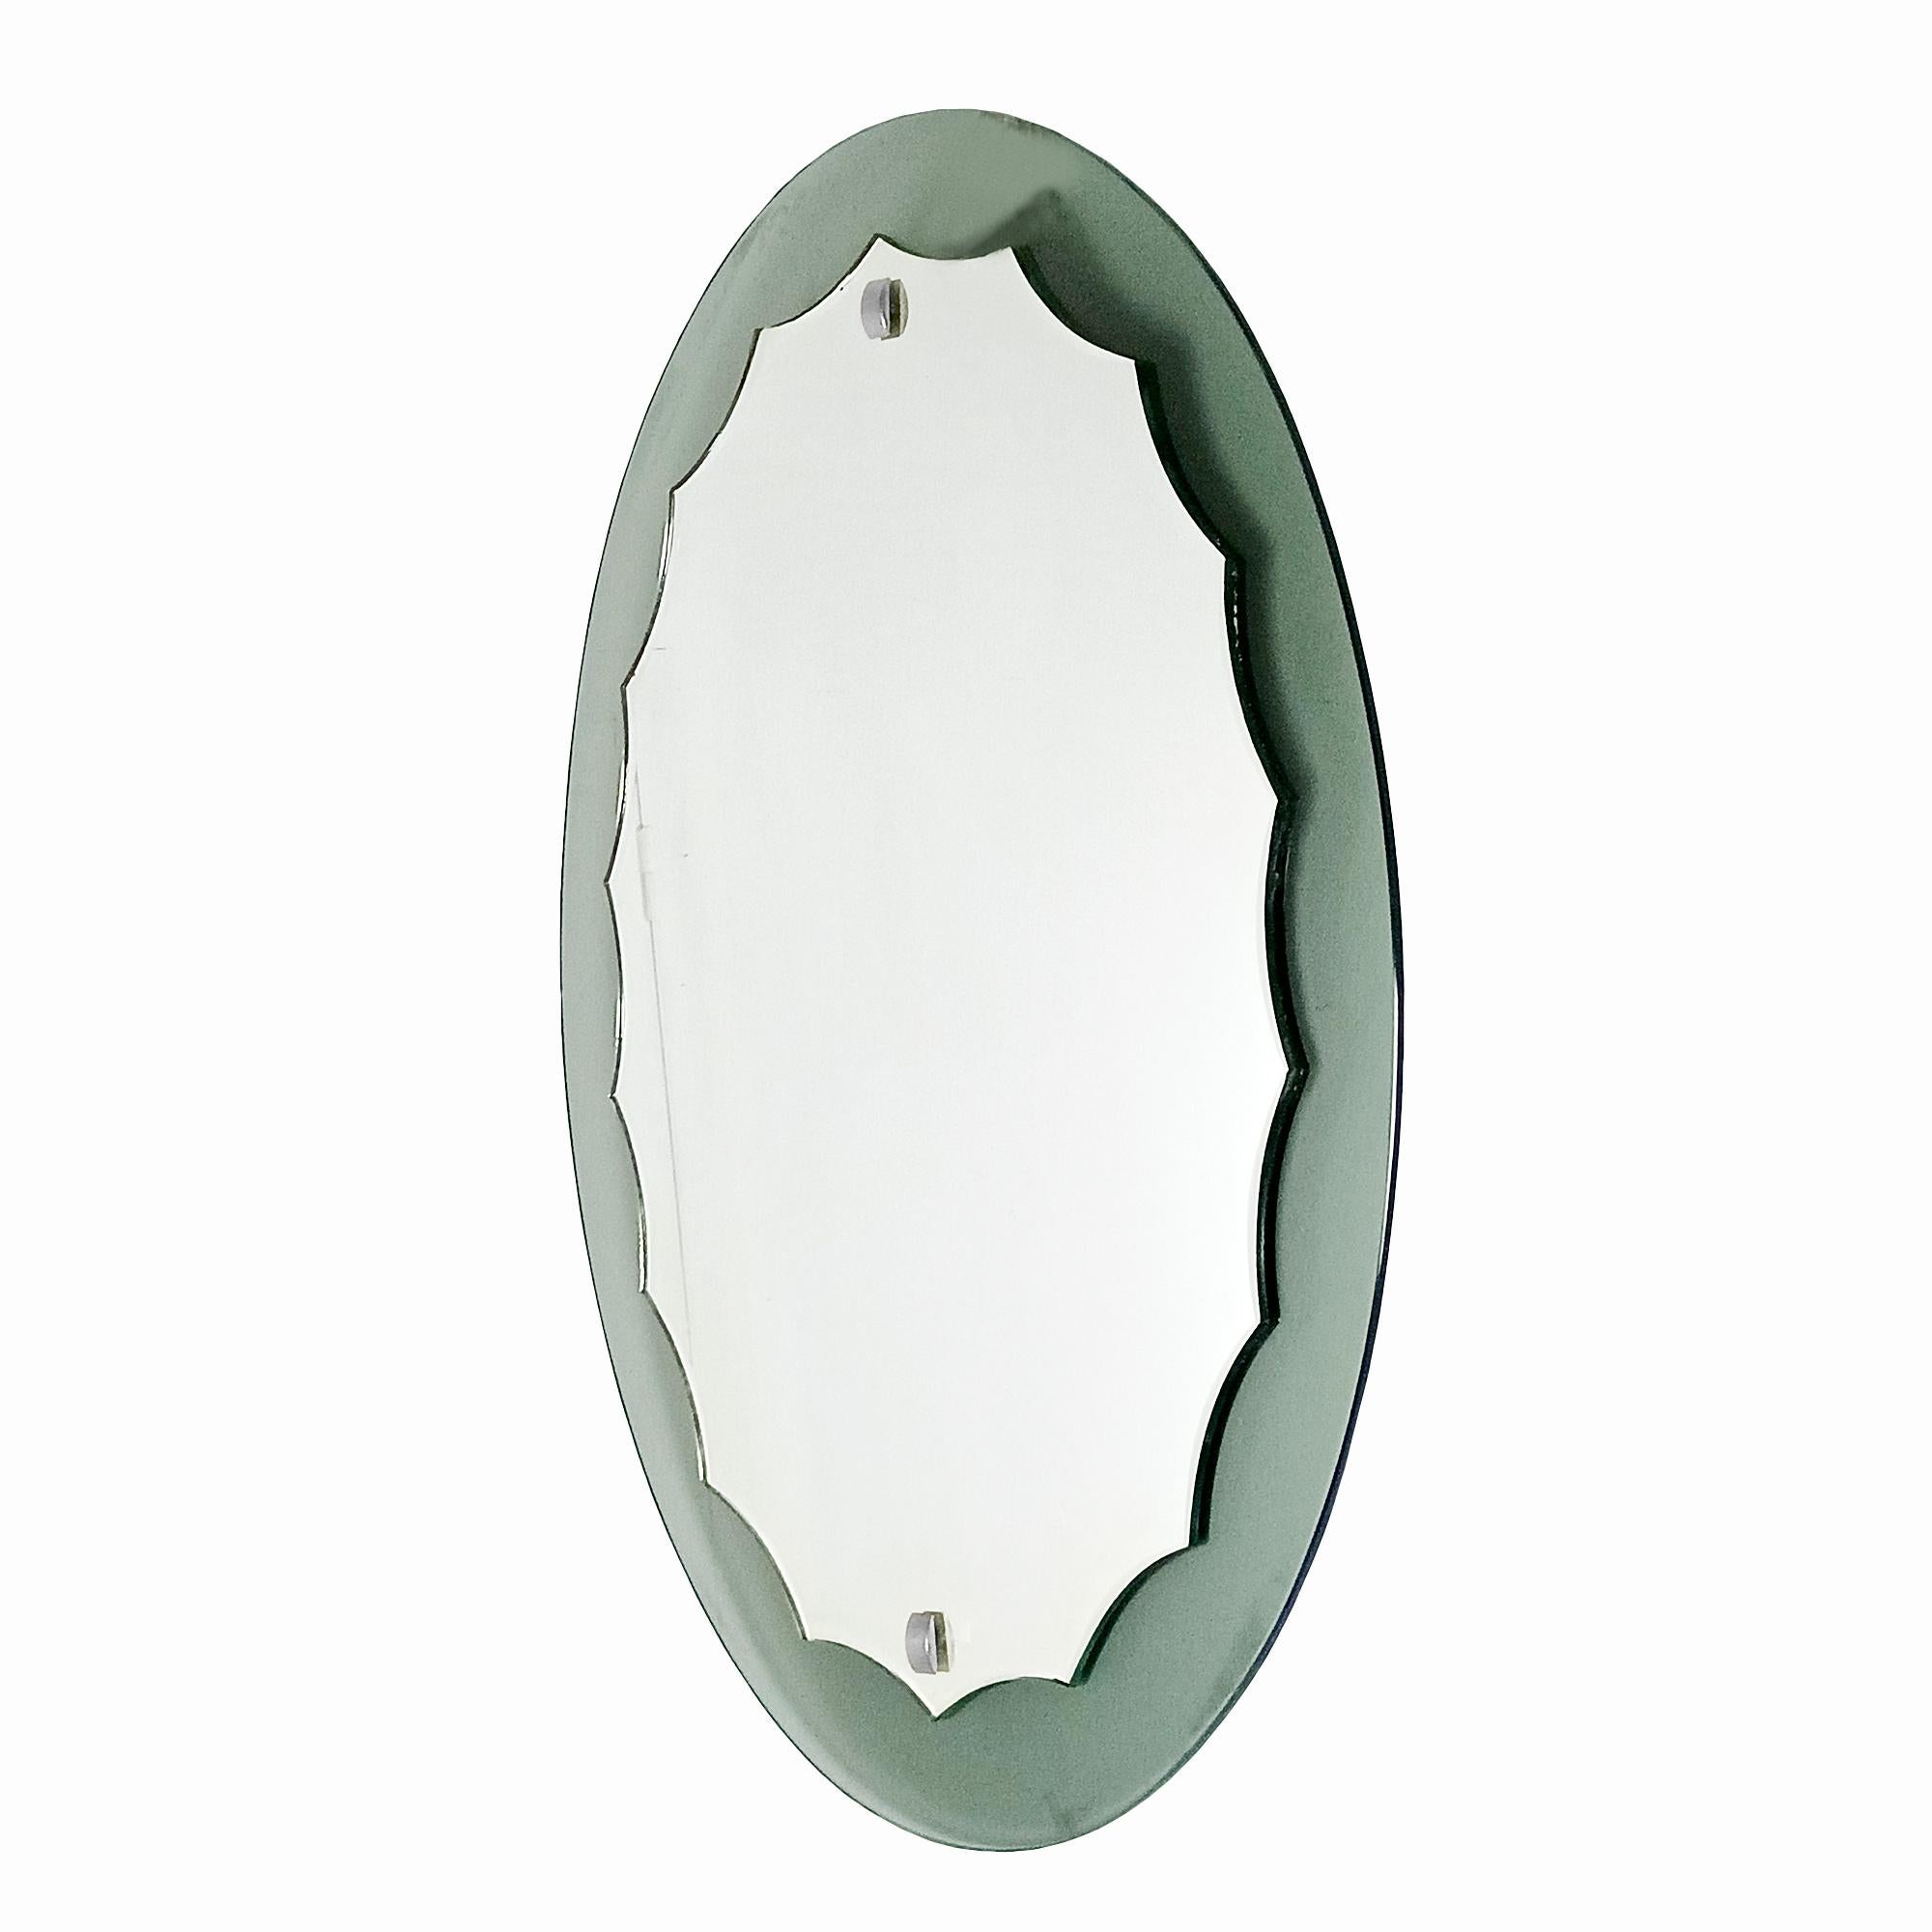 Wall mirror with gray back glass, festooned bevelled crystal and chrome metal finishes.

Italy circa 1960.